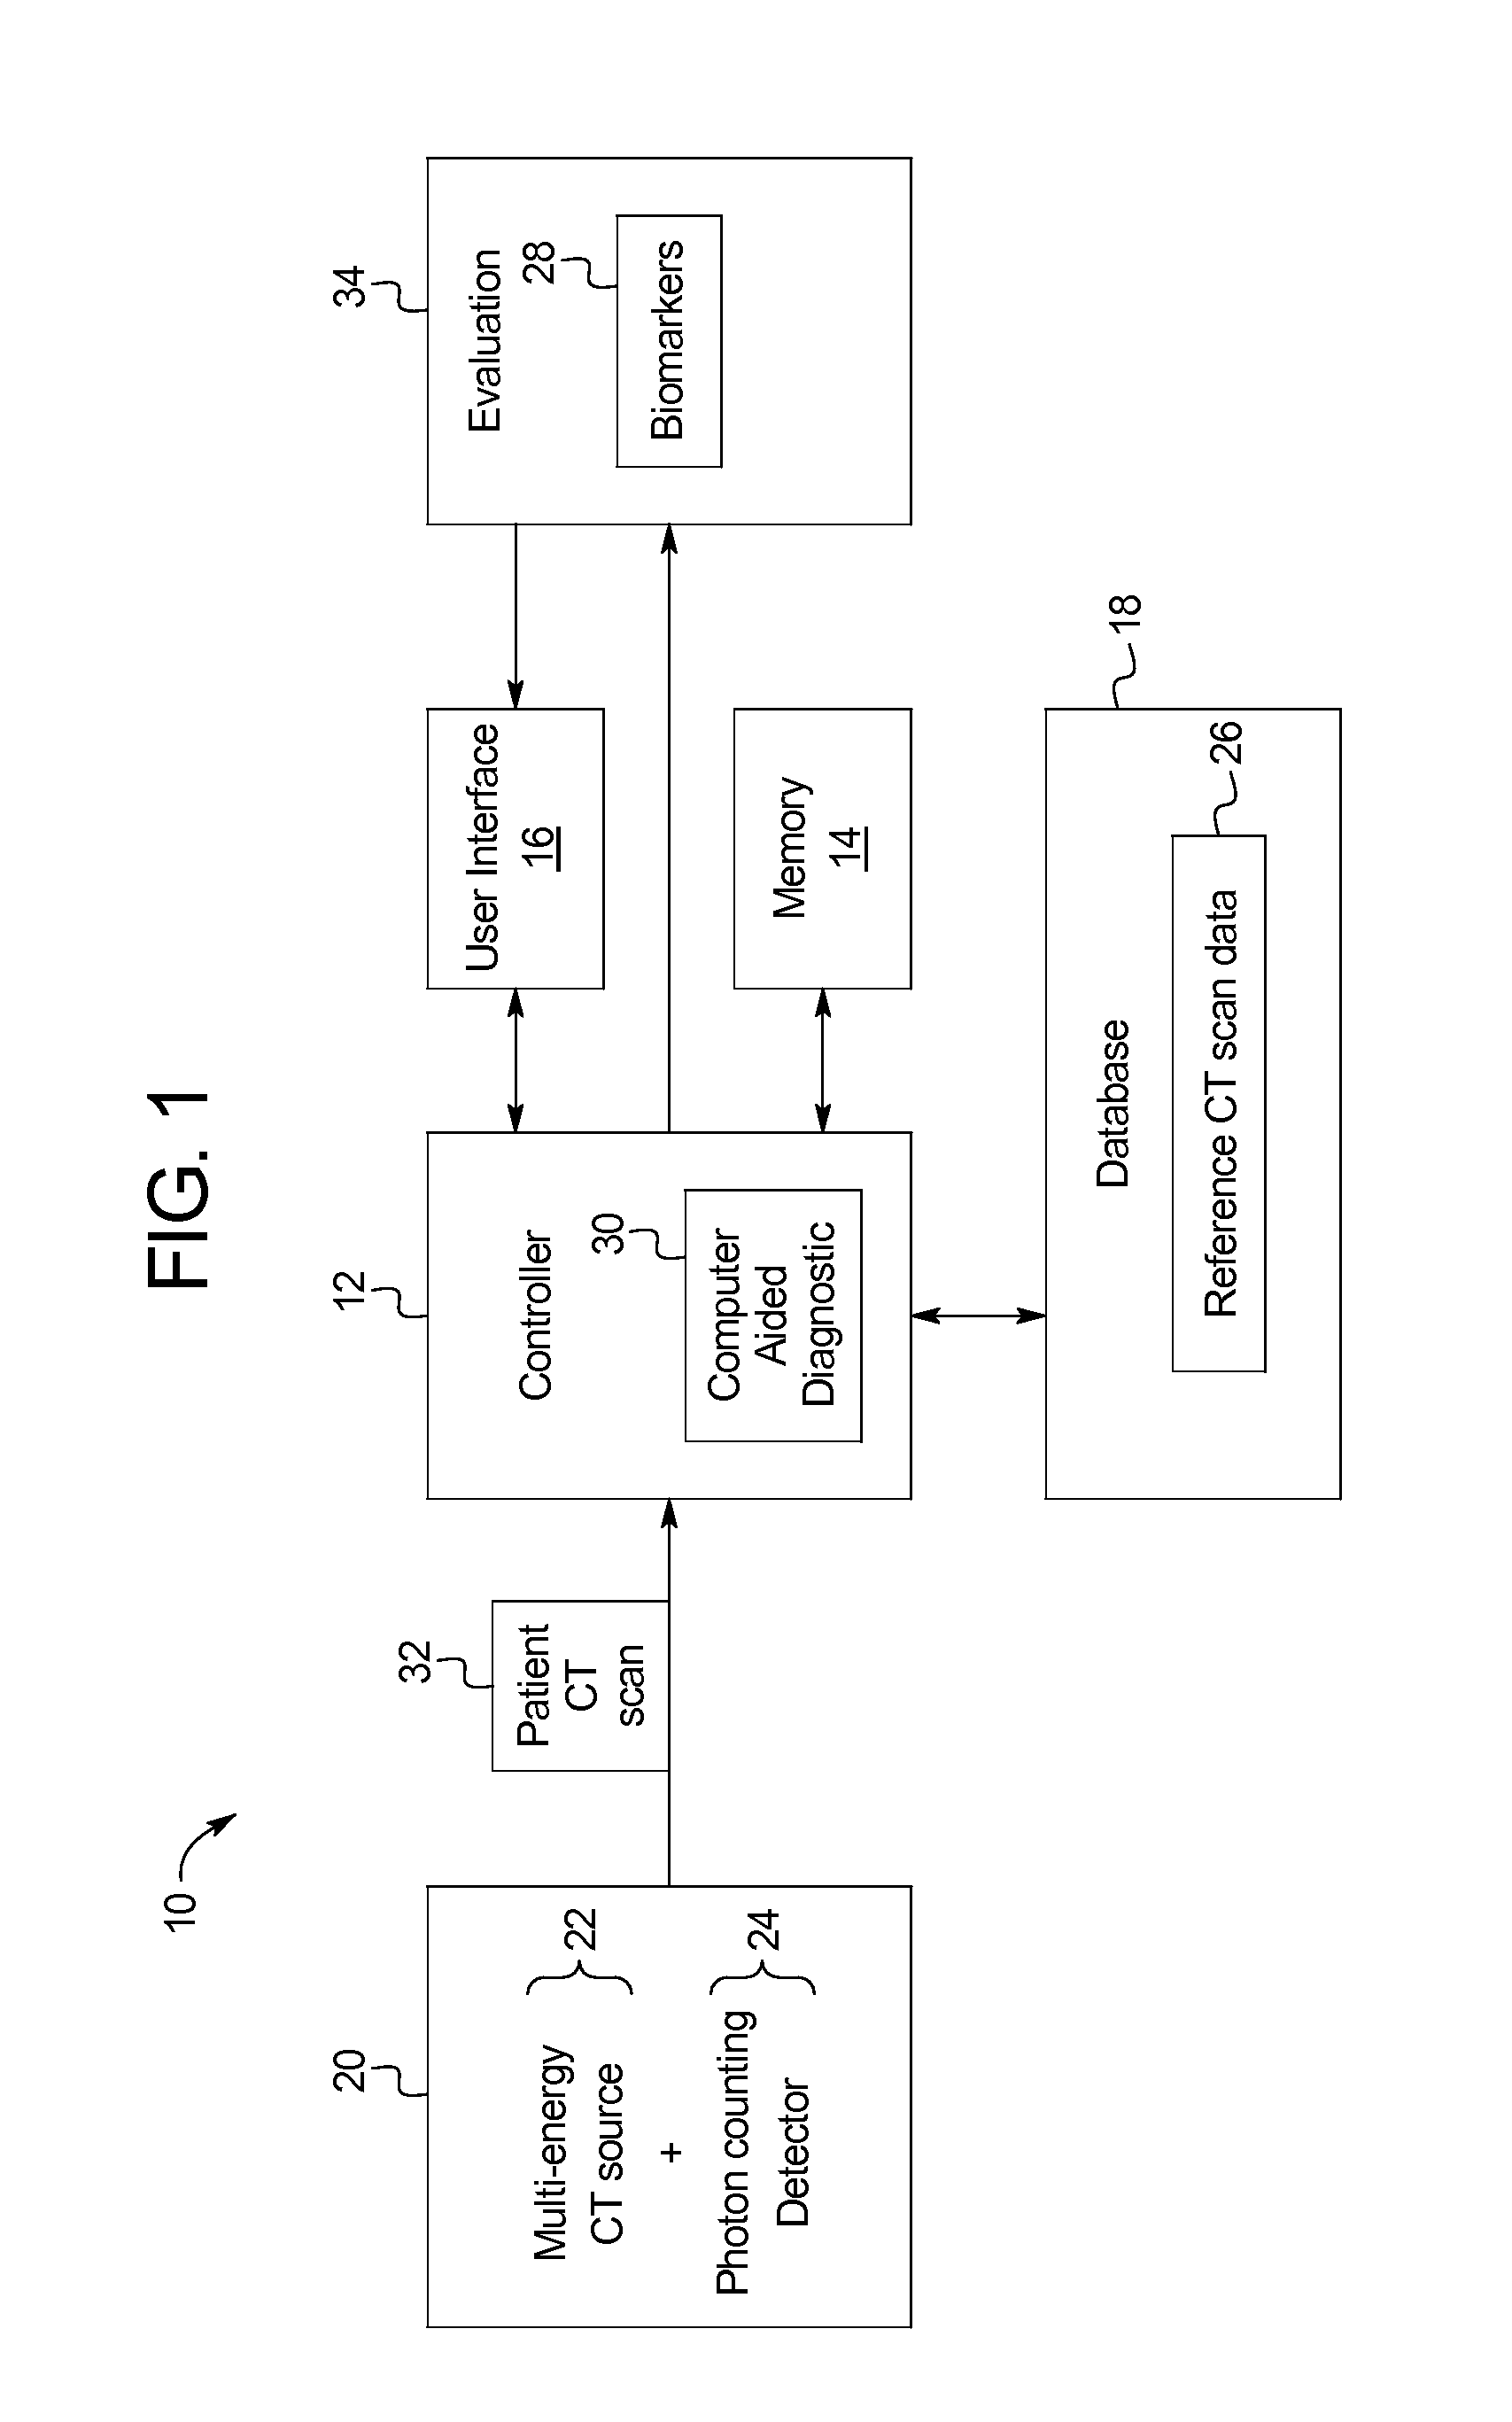 Systems and methods for evaluating a brain scan